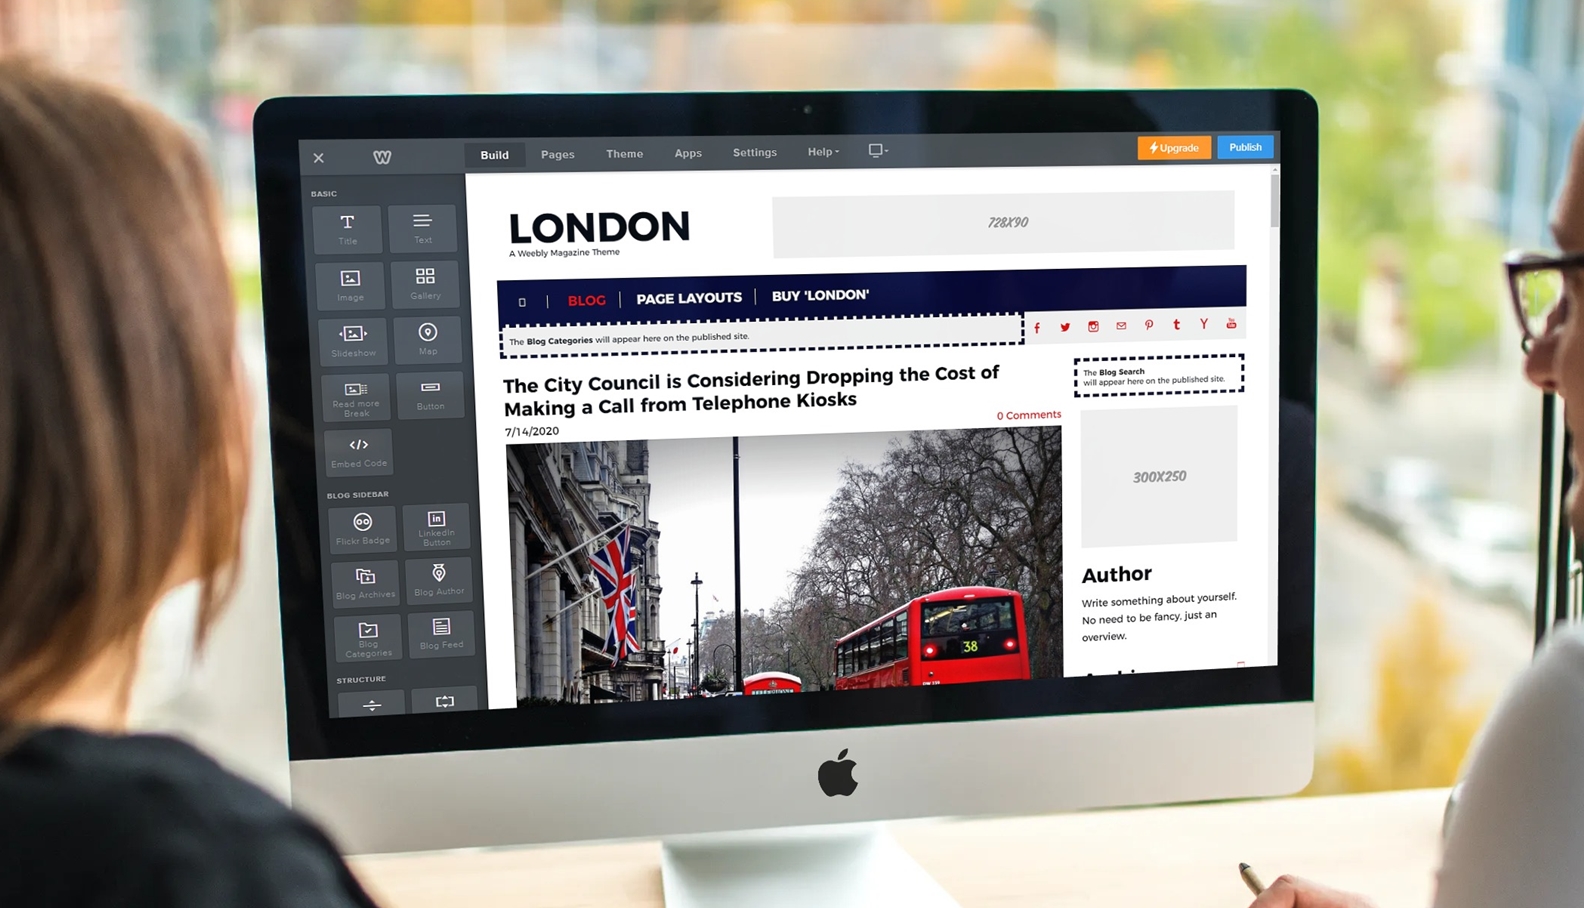 London Weebly Magazine Theme in the Weebly Editor